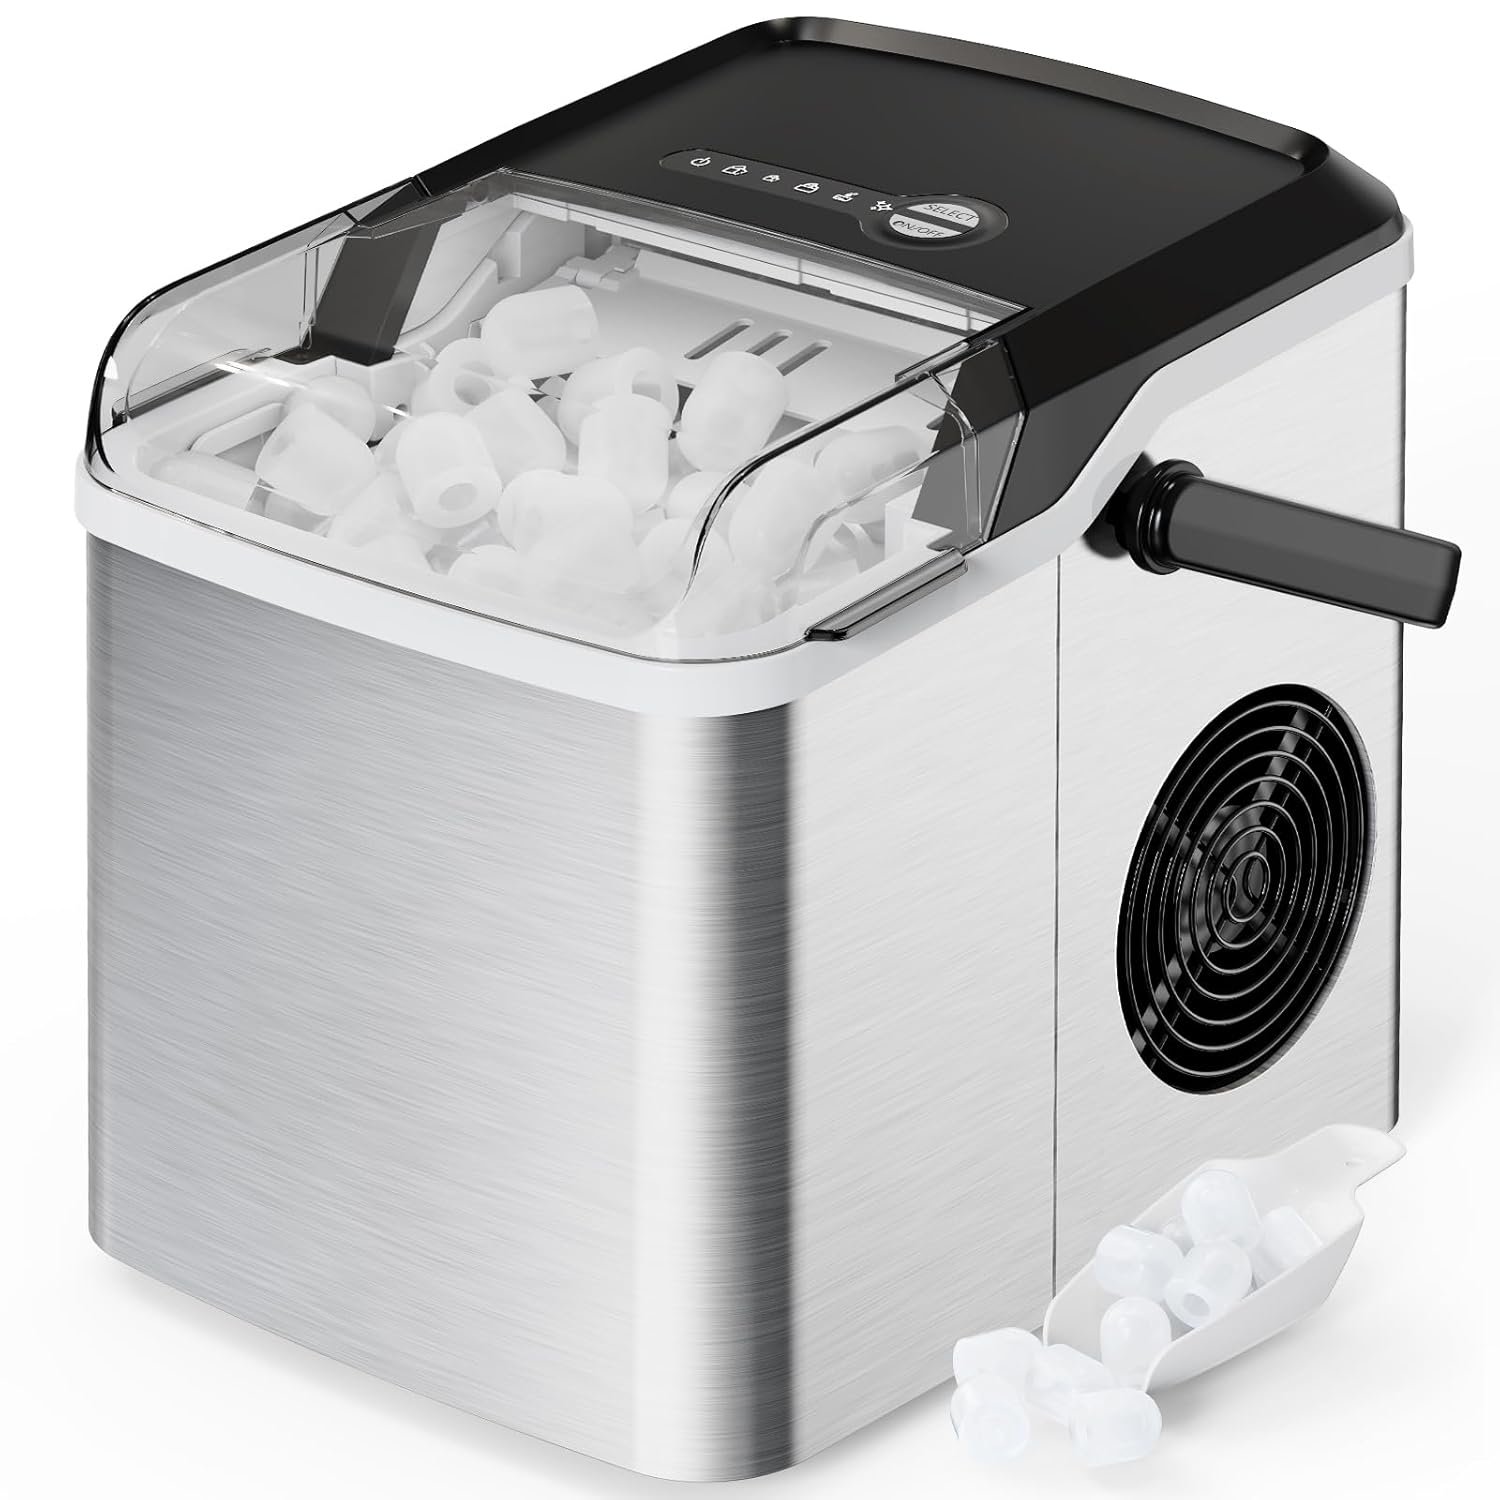 Portable Ice Machine Review